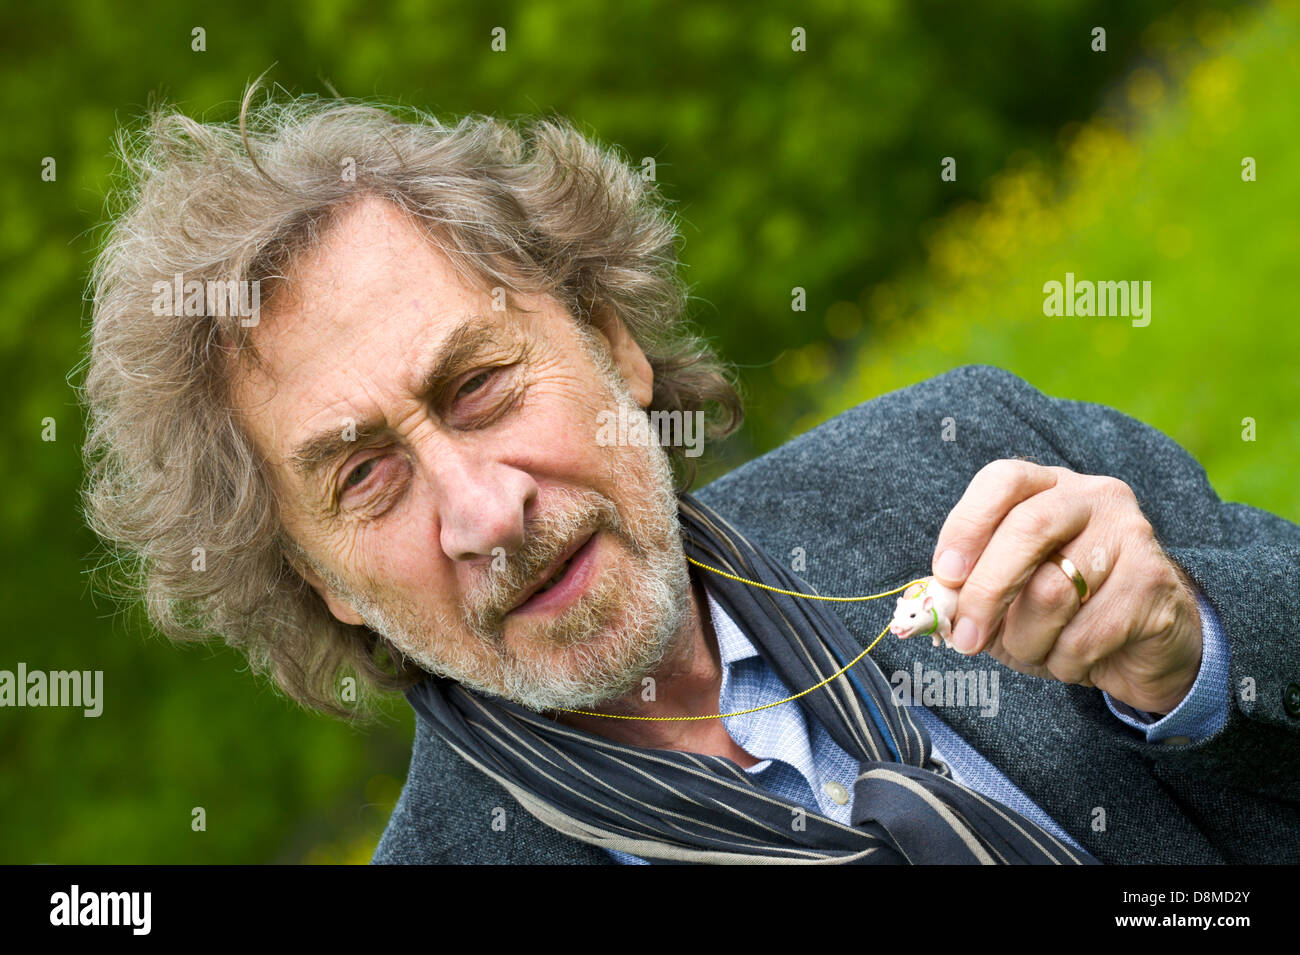 Howard Jacobson with novelty pig that his wife bought him as a present for winning the 2013 Bollinger Everyman Wodehouse Prize for Comic Fiction for his novel 'Zoo Time' pictured at Hay Festival 2013 Hay on Wye Powys Wales UK Stock Photo